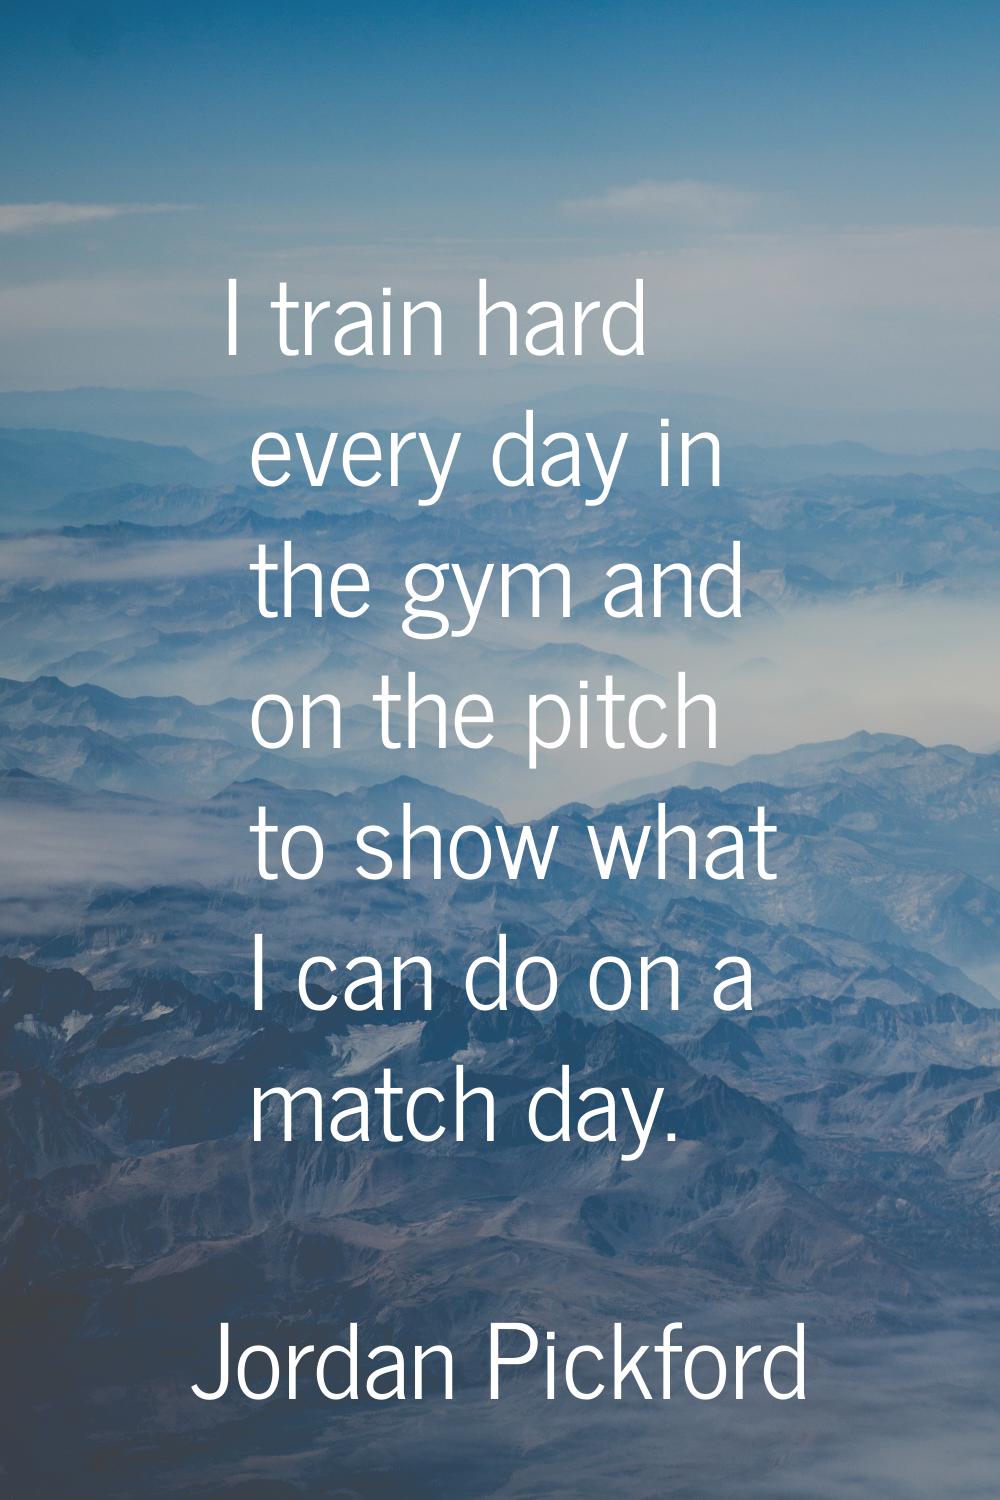 I train hard every day in the gym and on the pitch to show what I can do on a match day.